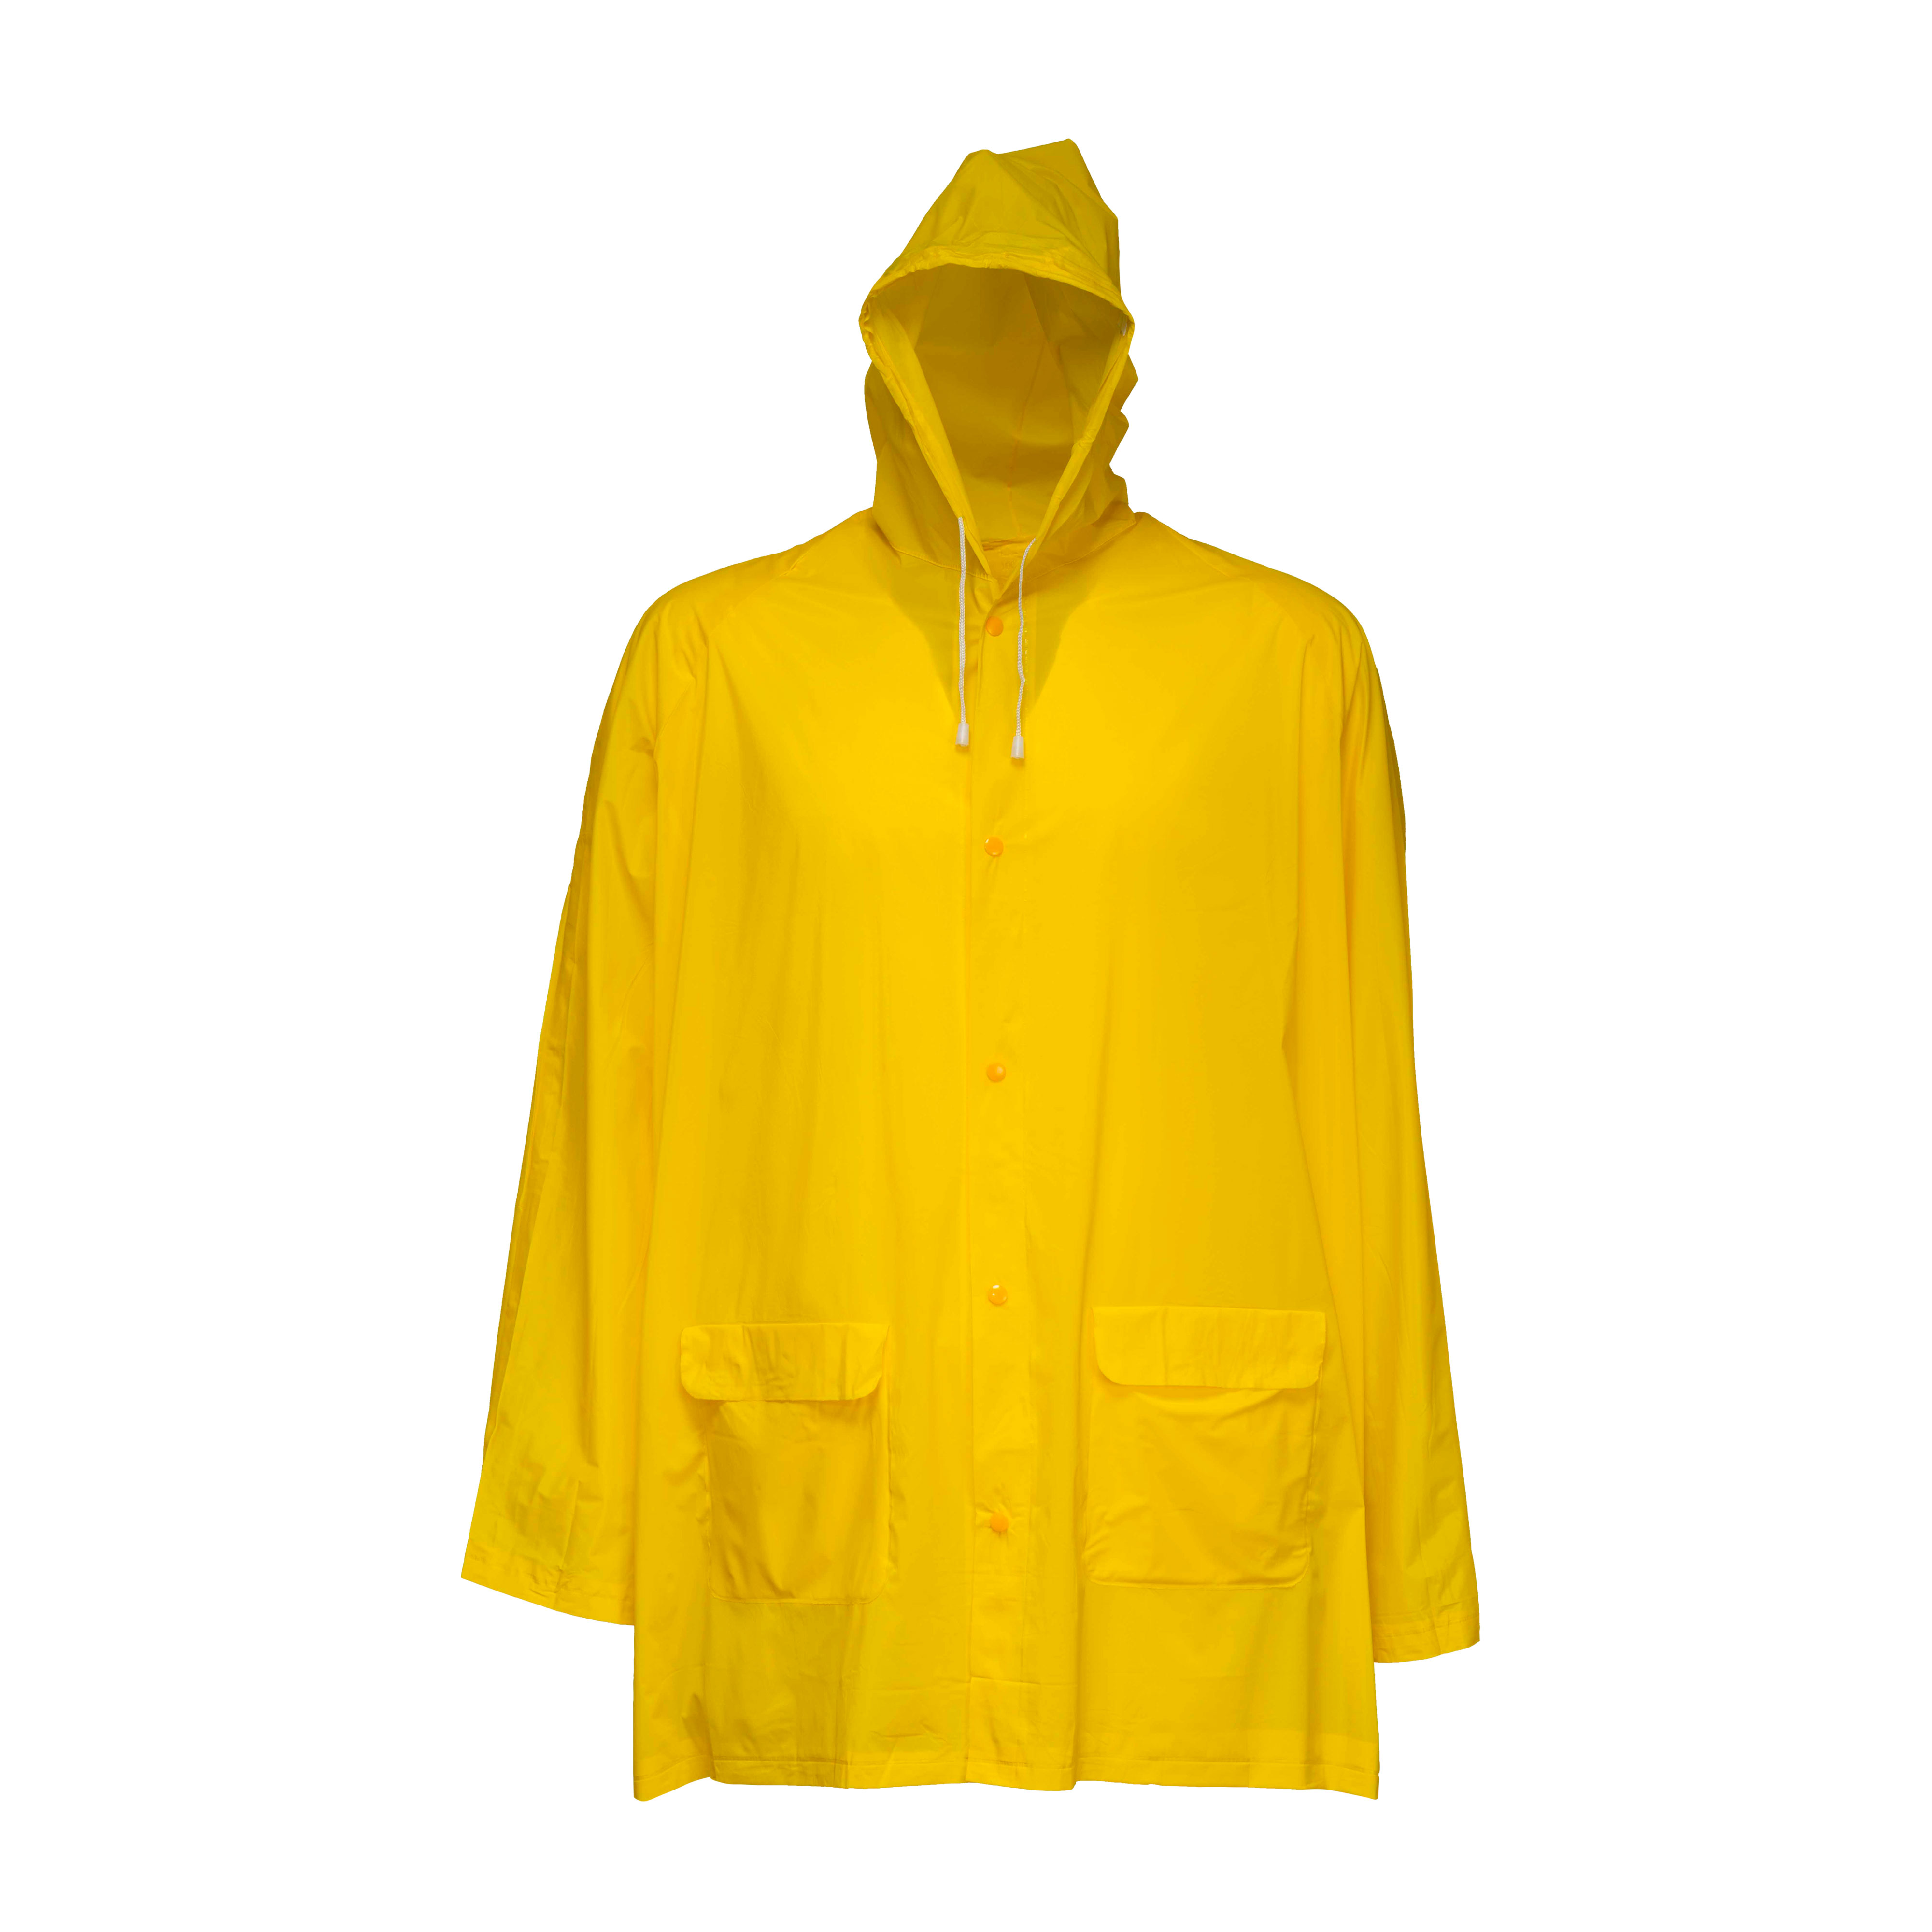 Embossed PVC (200 g) raincoat, supplied in a pocket-sized bag. One size ...